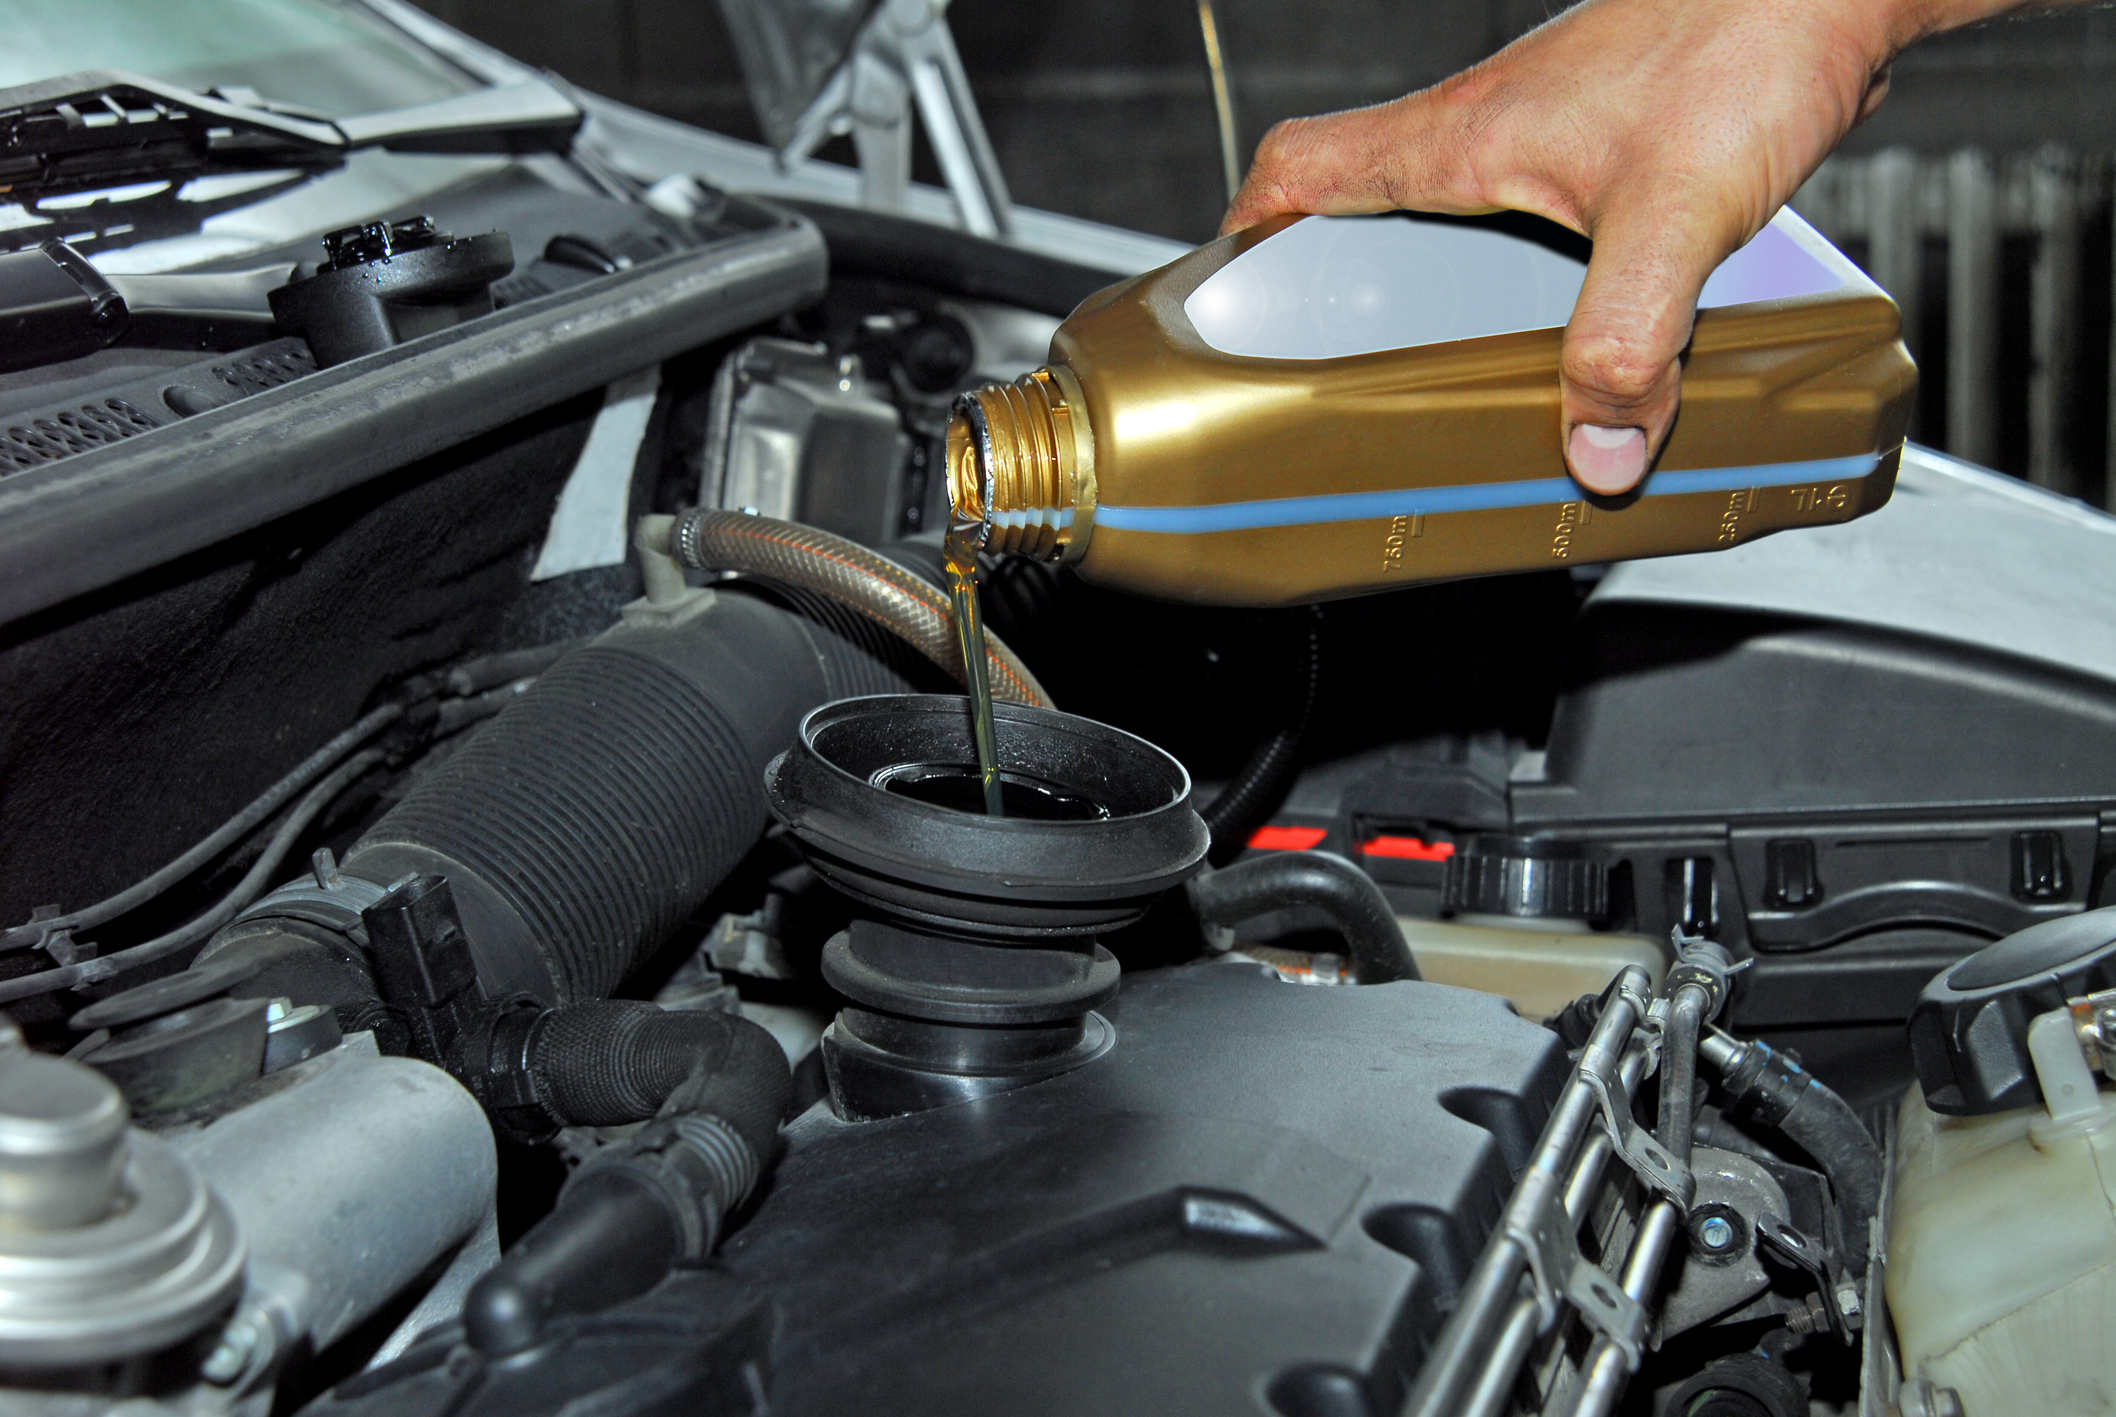 Six tips to help keep your car running smoothly